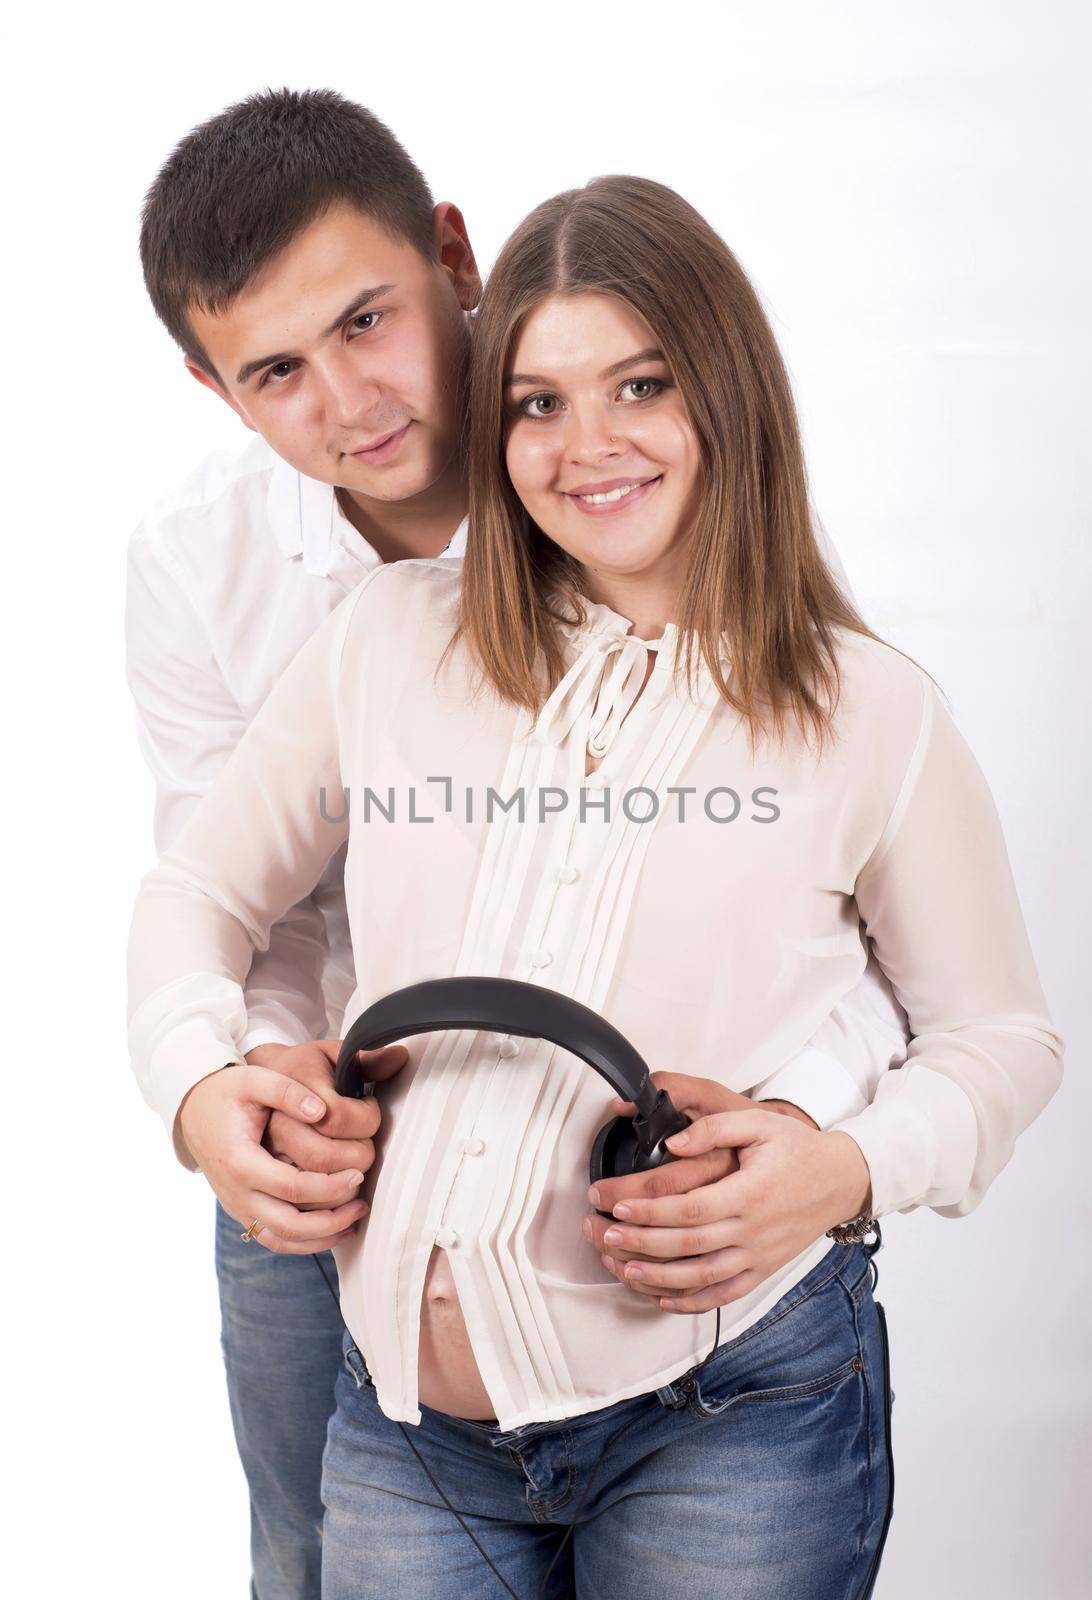 Pregnant woman and man in white shirts and jeans with headphones on white background